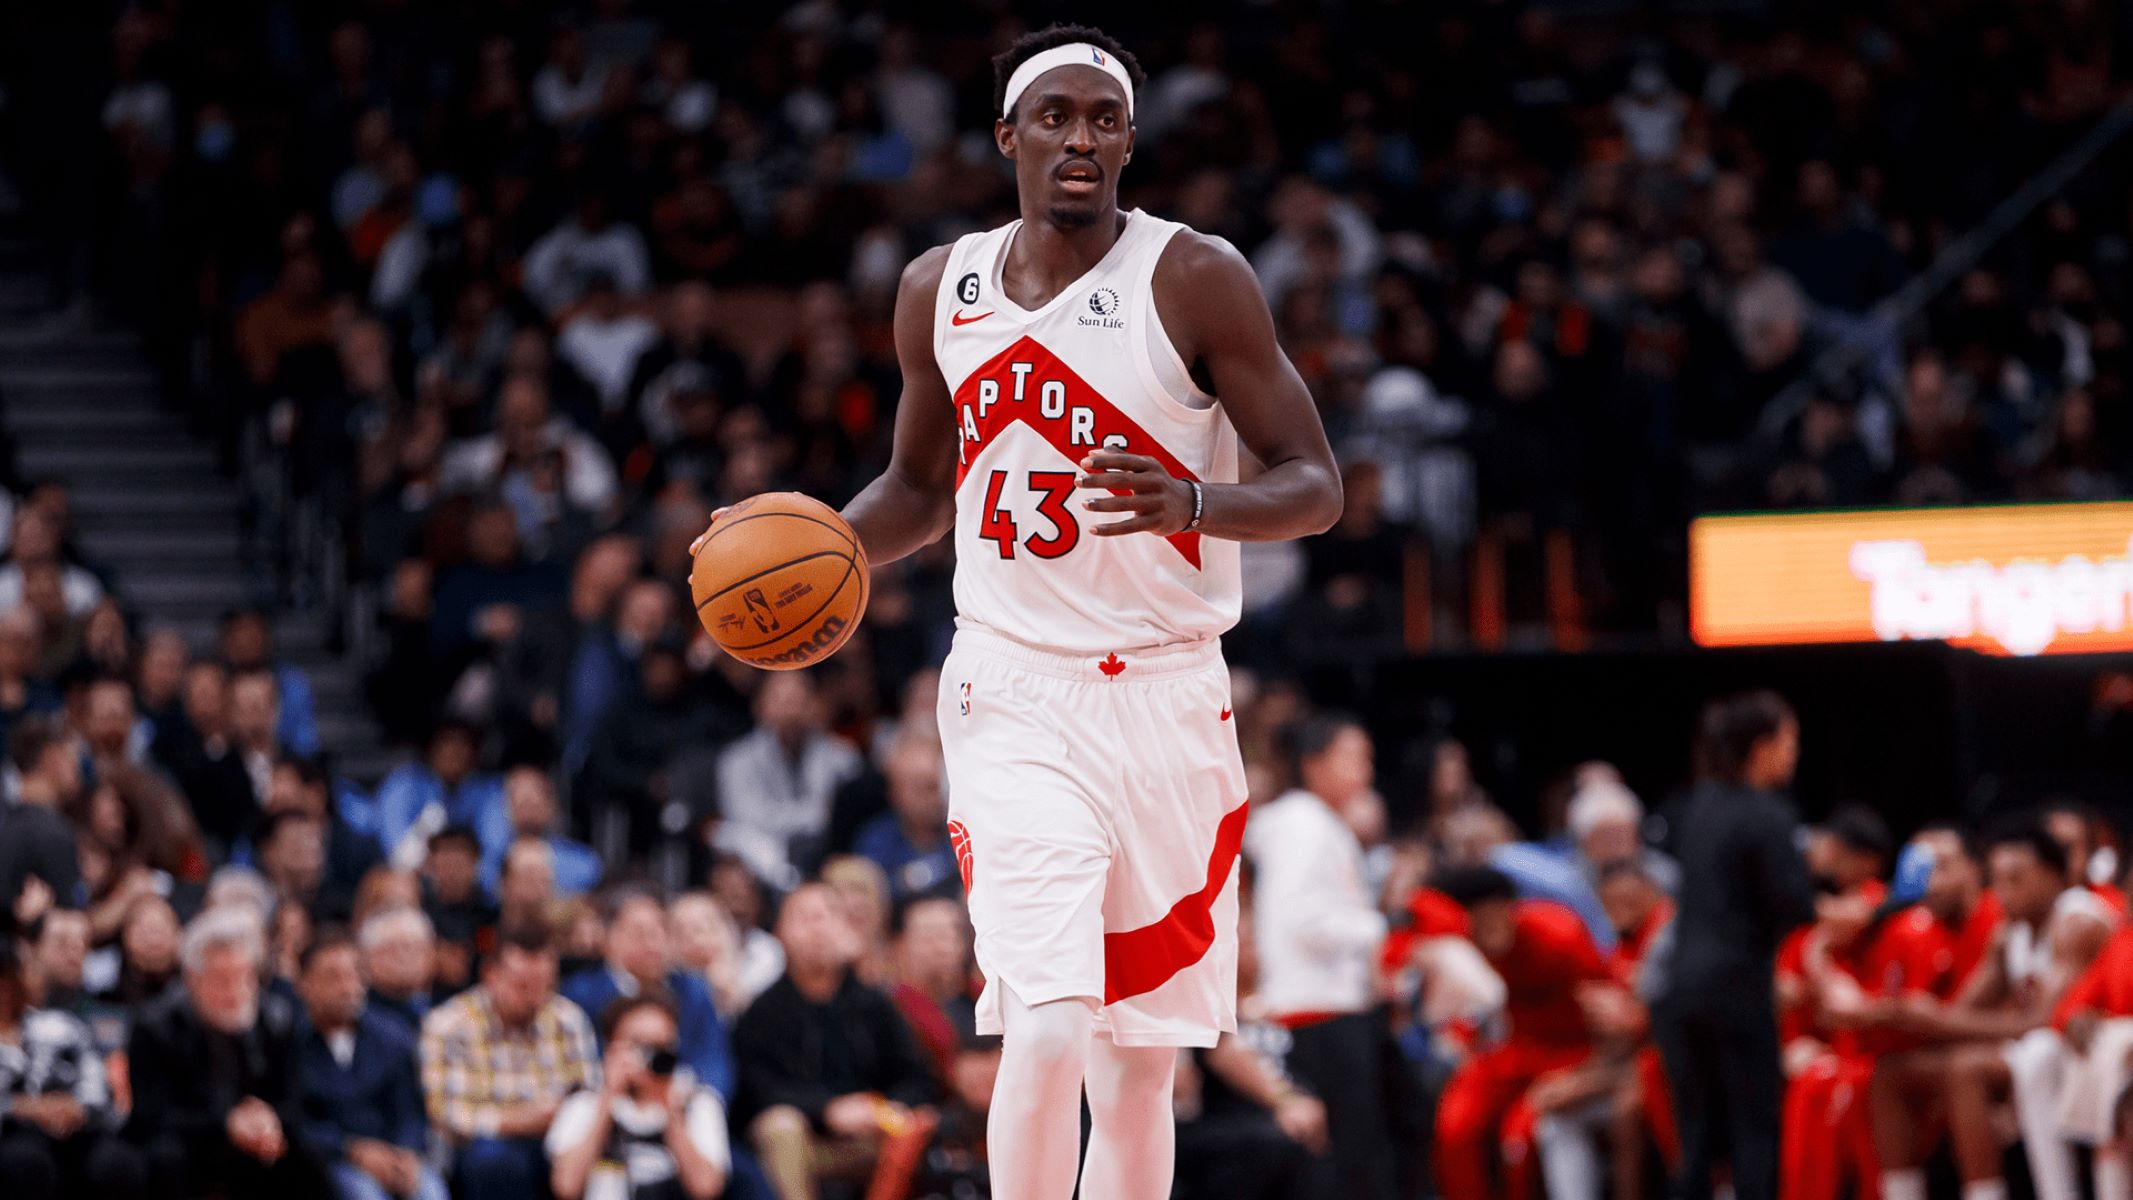 Pascal Siakam: The Embodiment of Raptors' Legacy and the Apex of Player Development